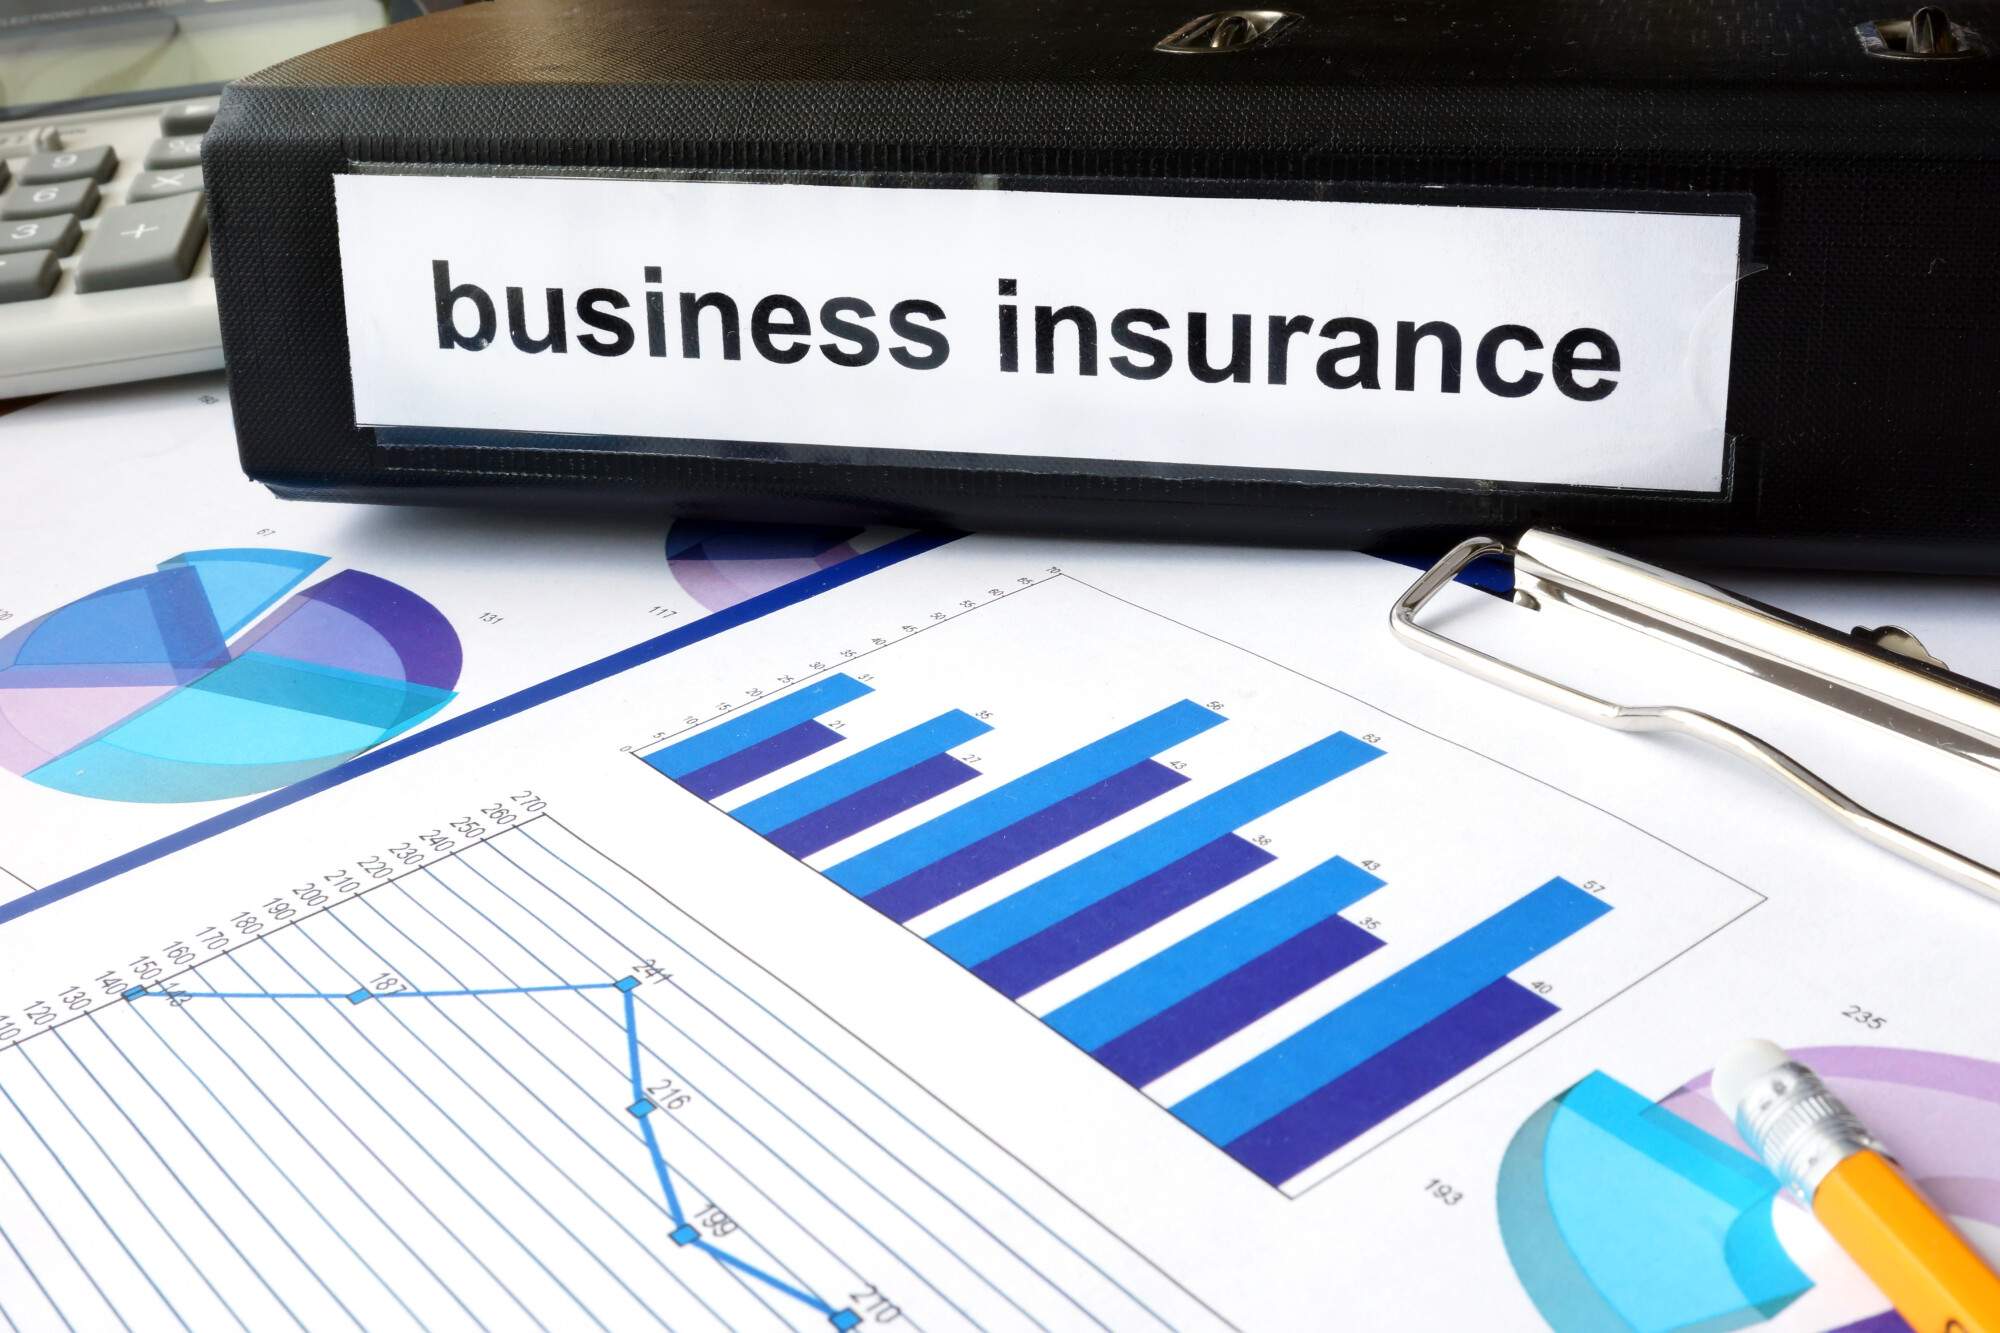 5 Business Insurance Buying Errors and How to Avoid Them